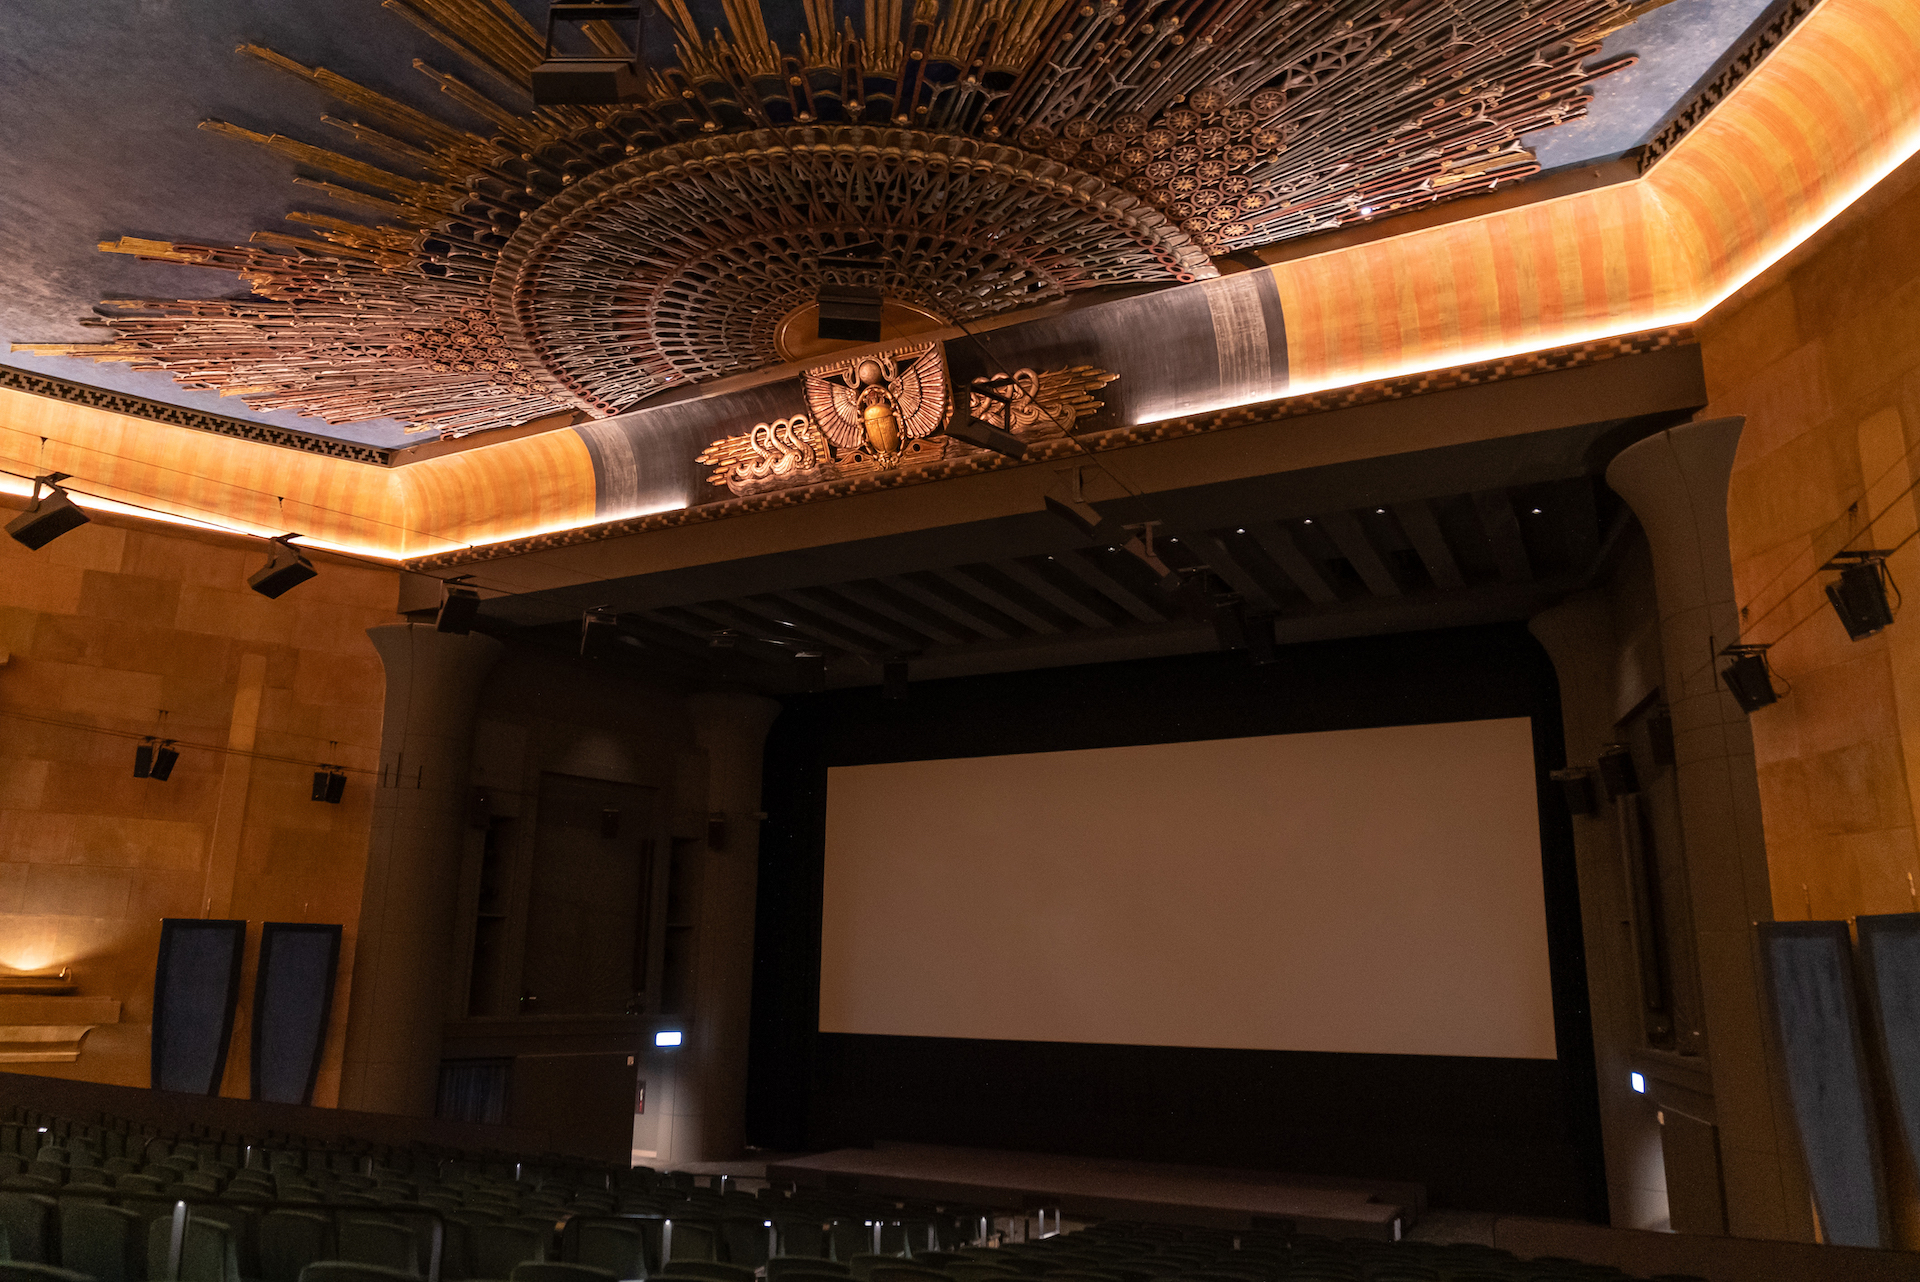 American Cinematheque Announces 70mm Titles for Reopening of Egyptian Theatre